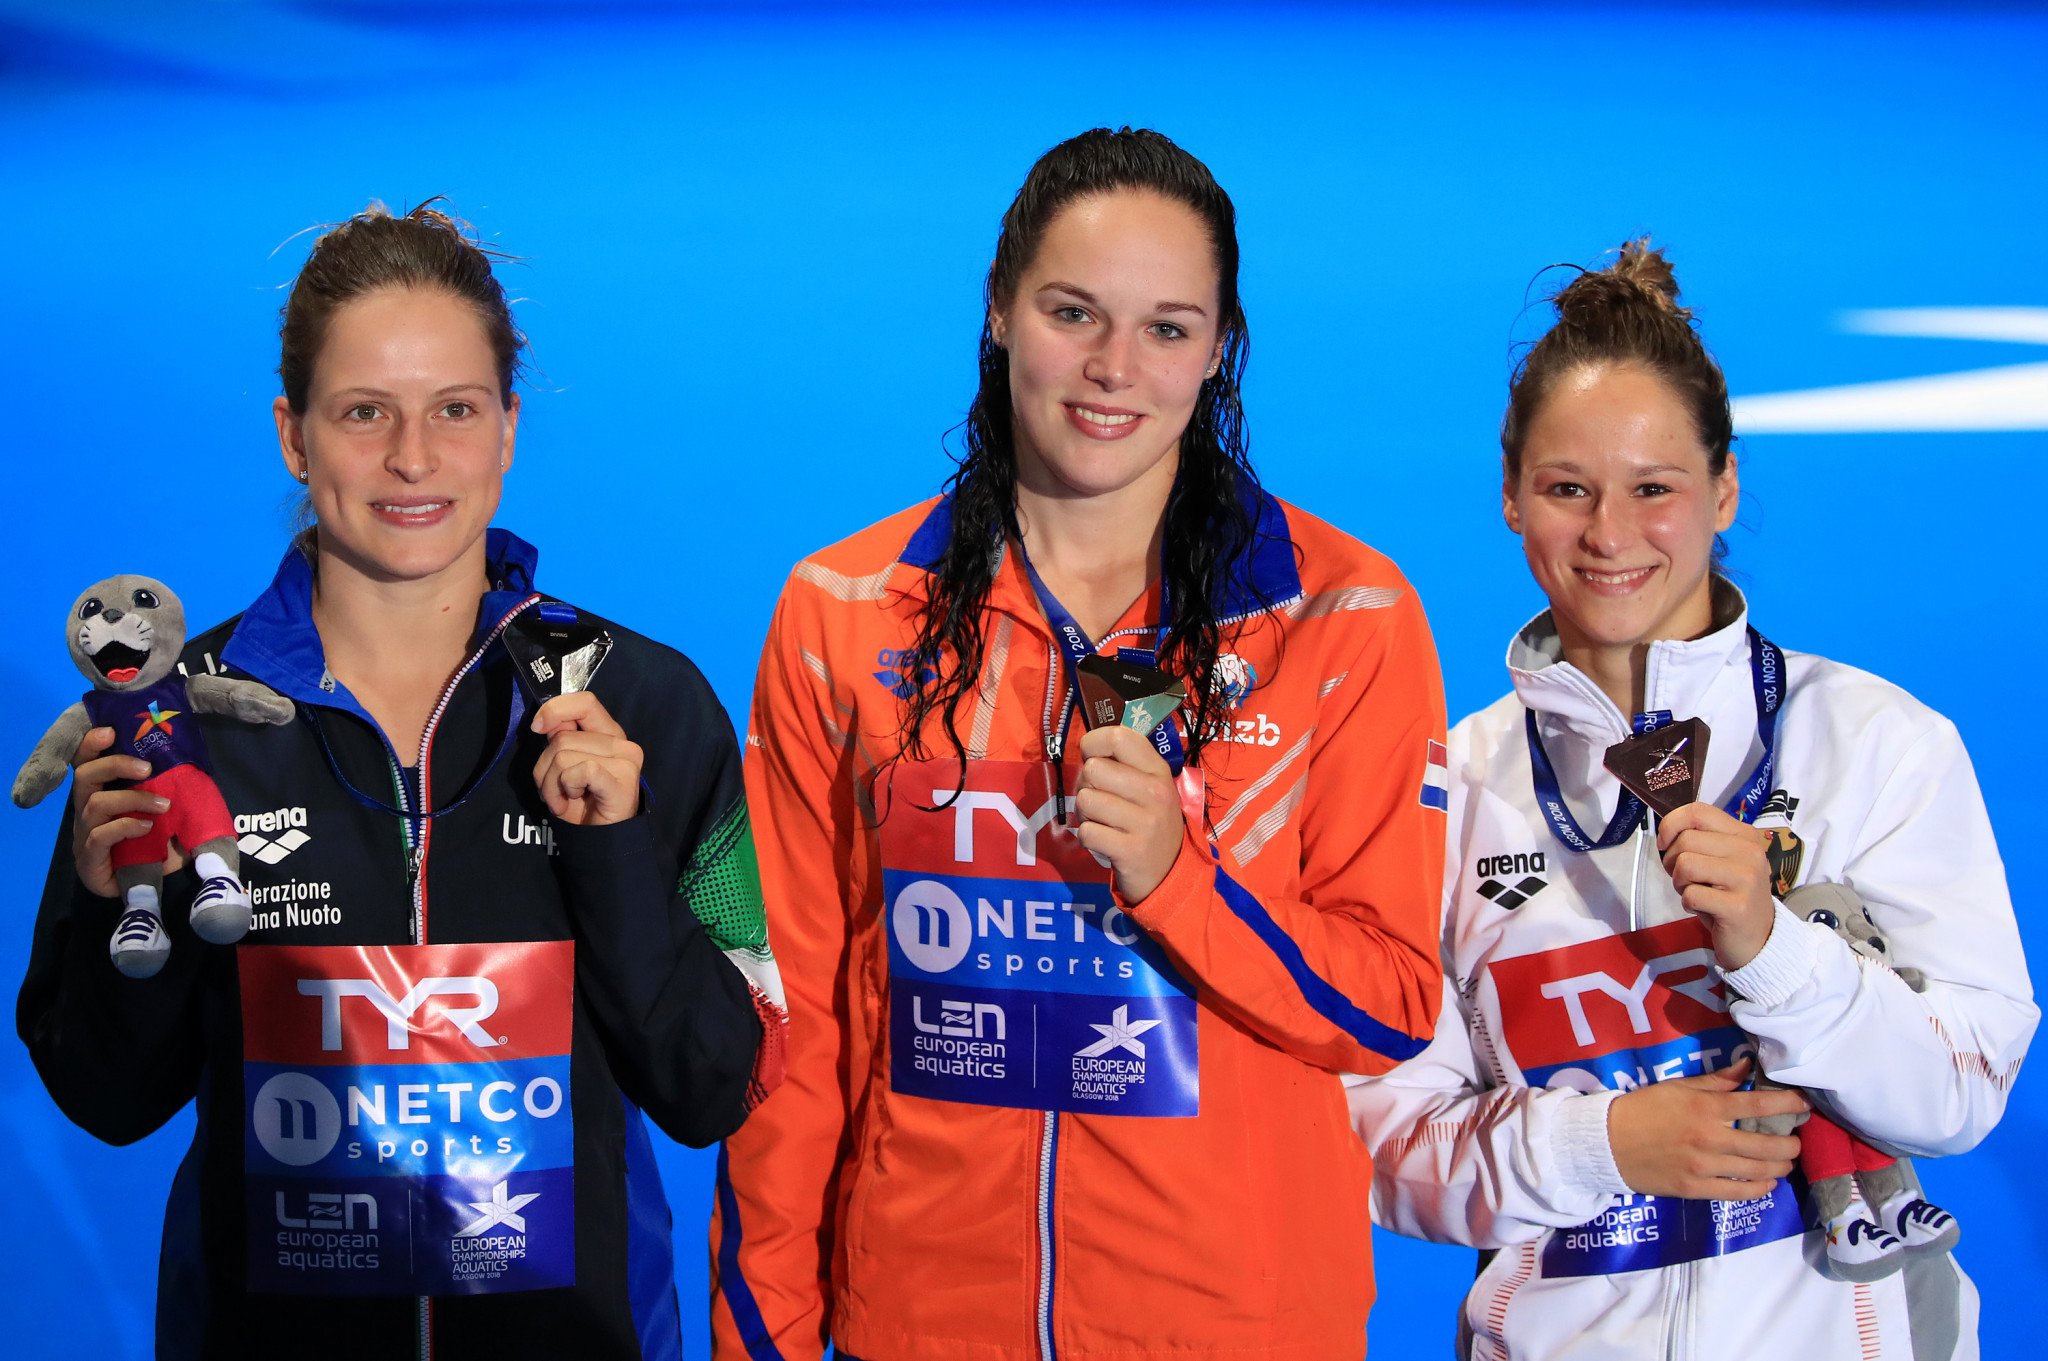 Gold for Netherlands in women's 10m platform as defending champion Toulson comes fifth at European Championships